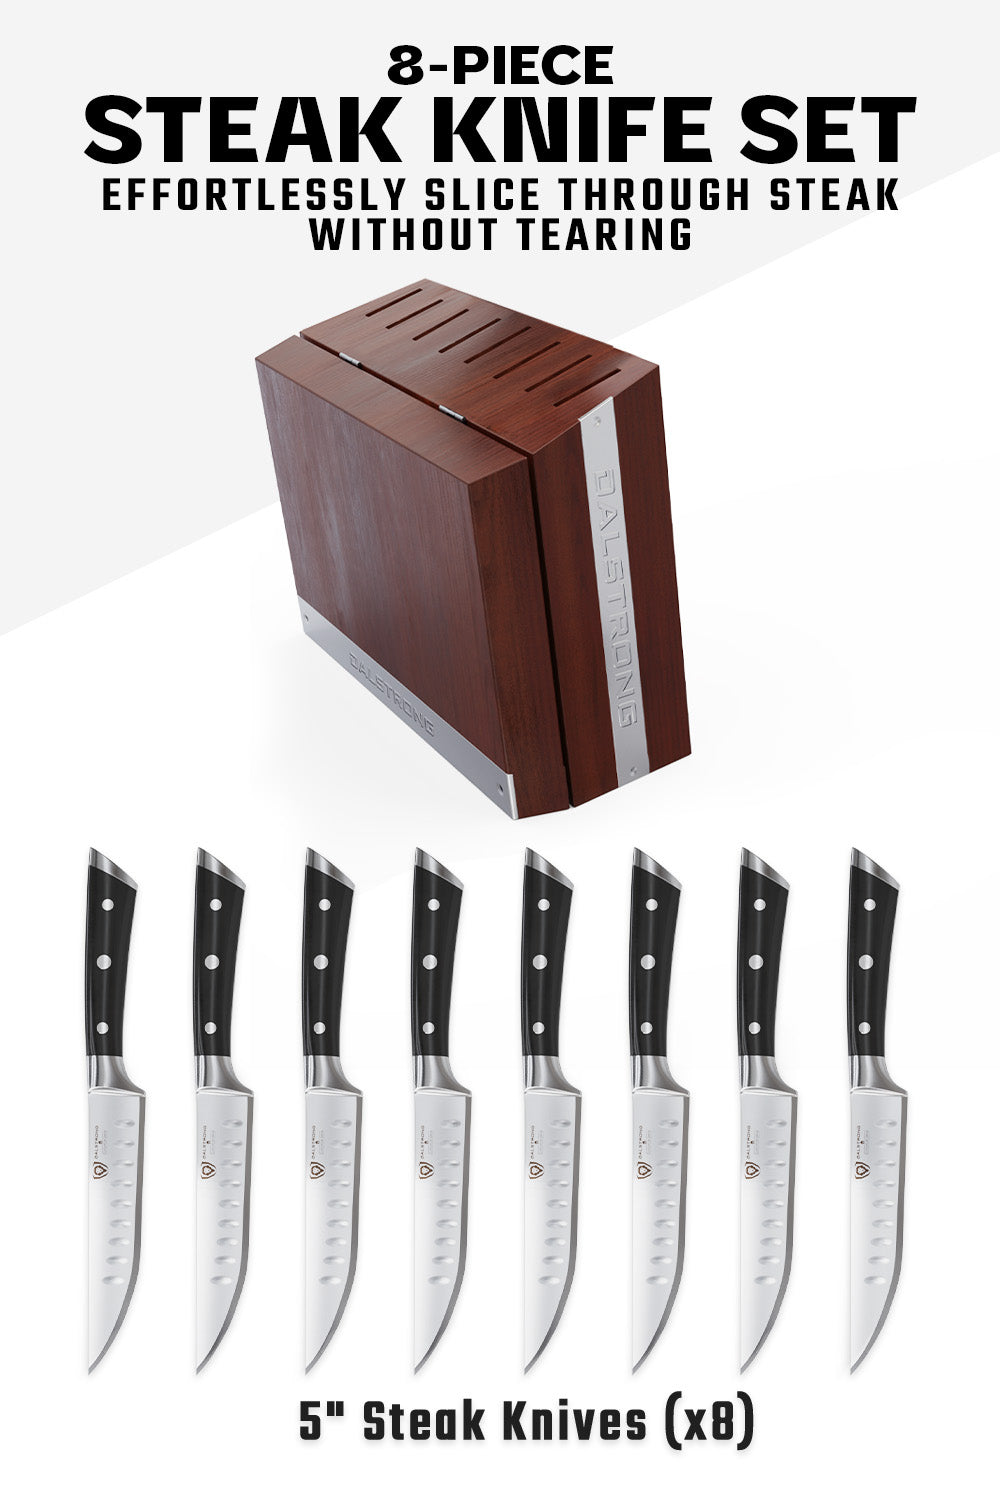 Dalstrong gladiator series 8 piece steak knife set featuring all eight steak knives.